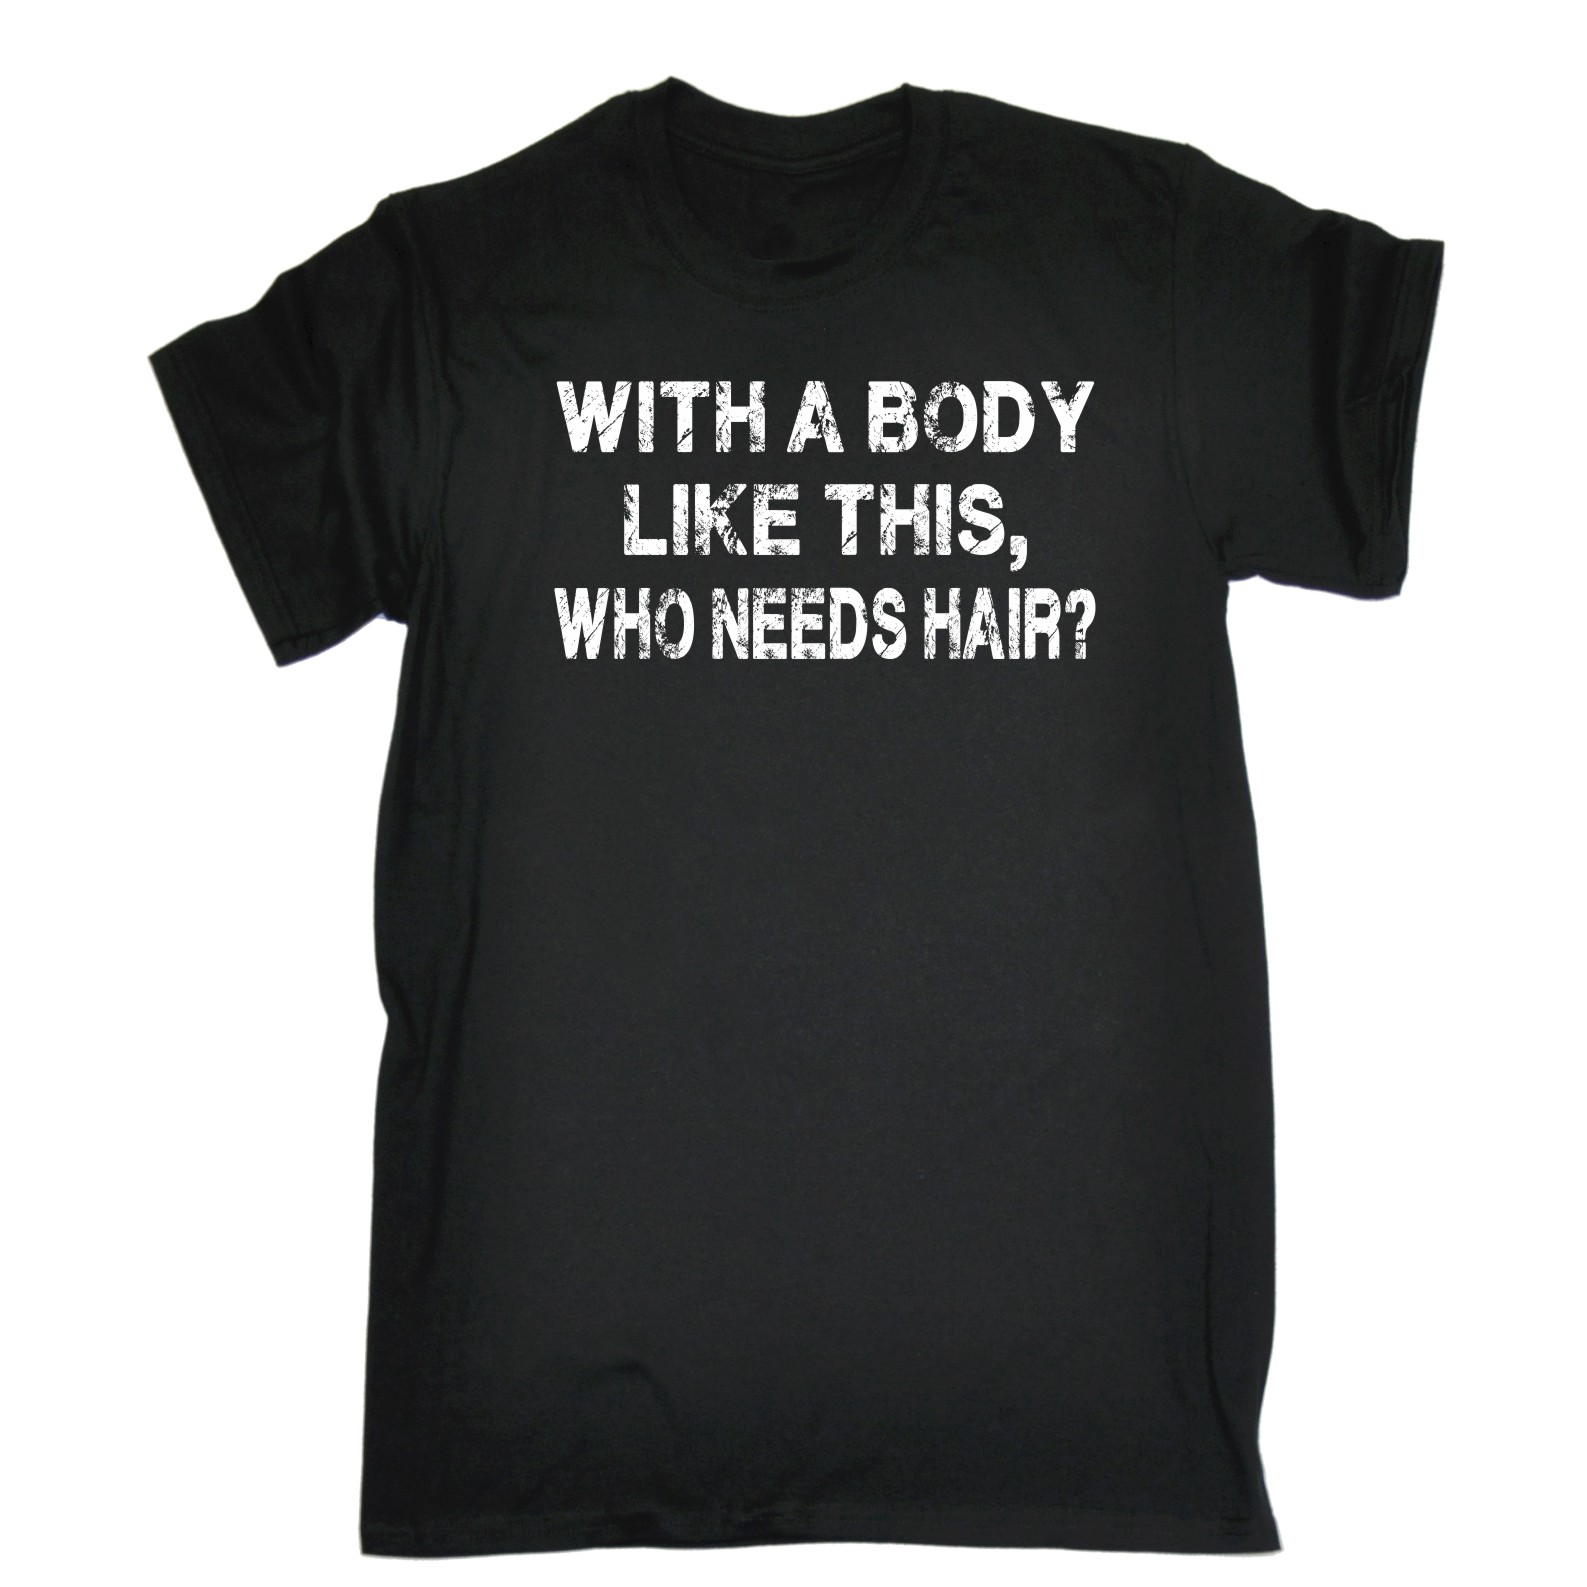 thumbnail 2 - Men&#039;s With A Body Like This Who Needs Hair Funny Joke Humour T-SHIRT Birthday